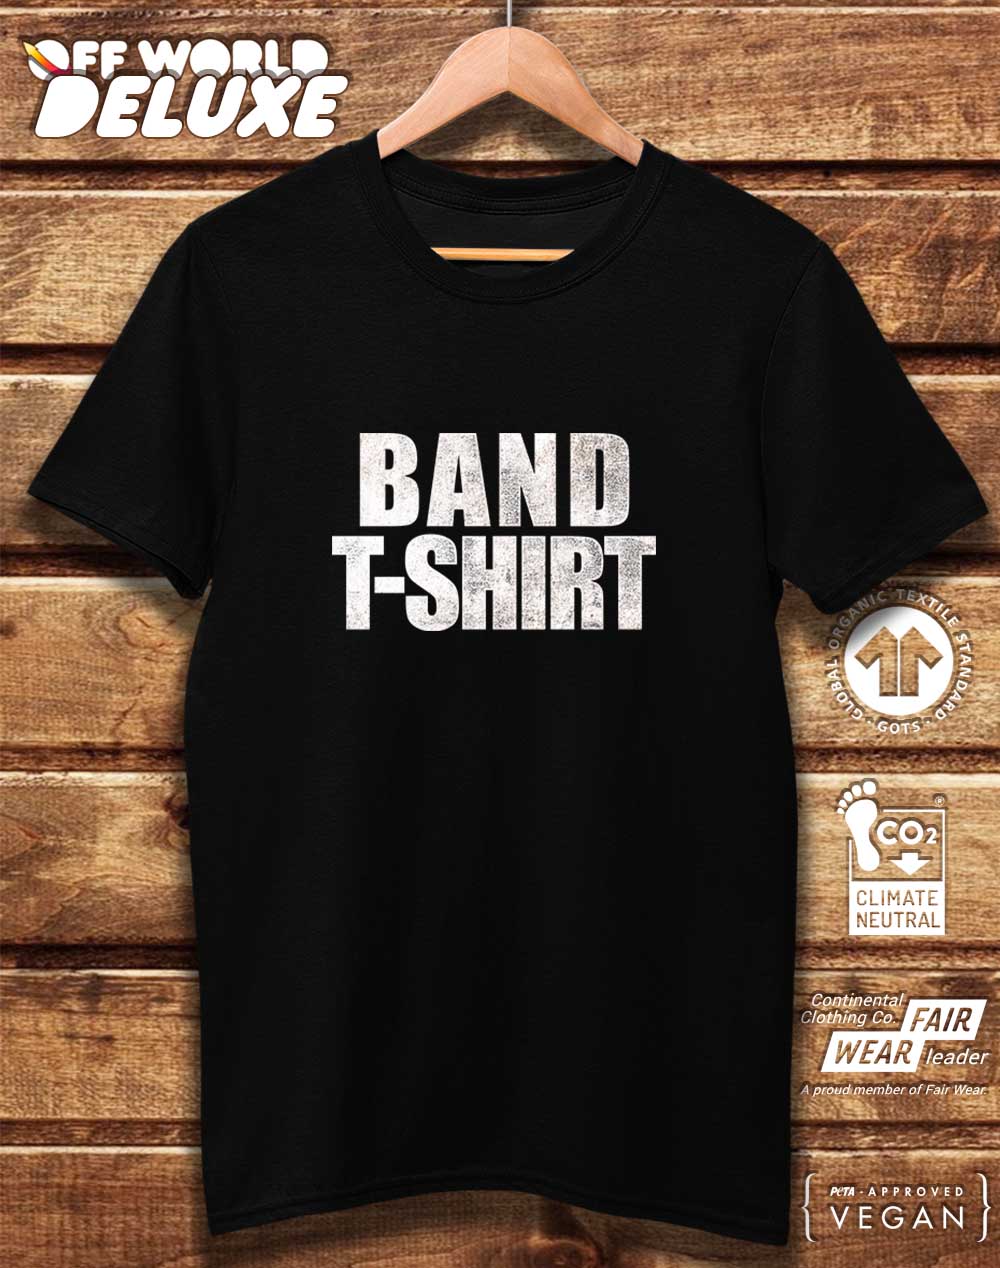 DELUXE Band Organic Cotton T-Shirt